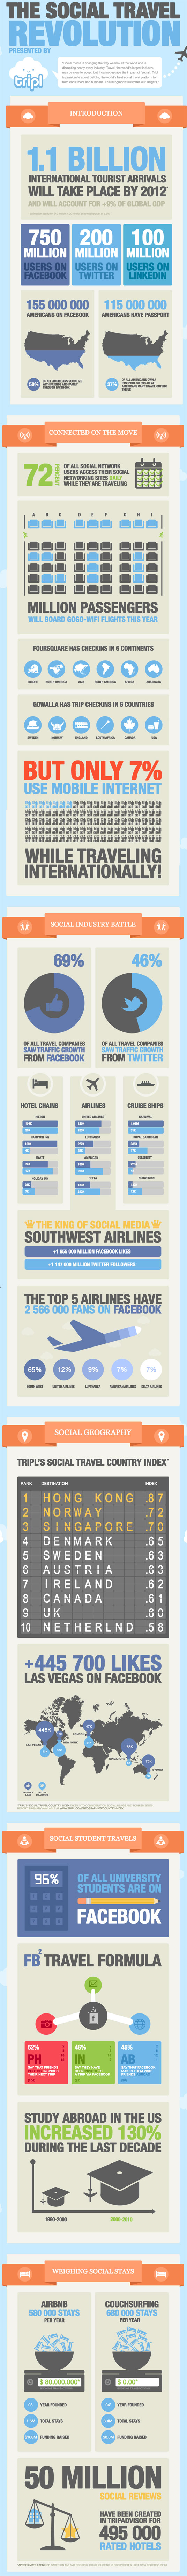 Infographic-The-Social-Travel-Revolution-Large